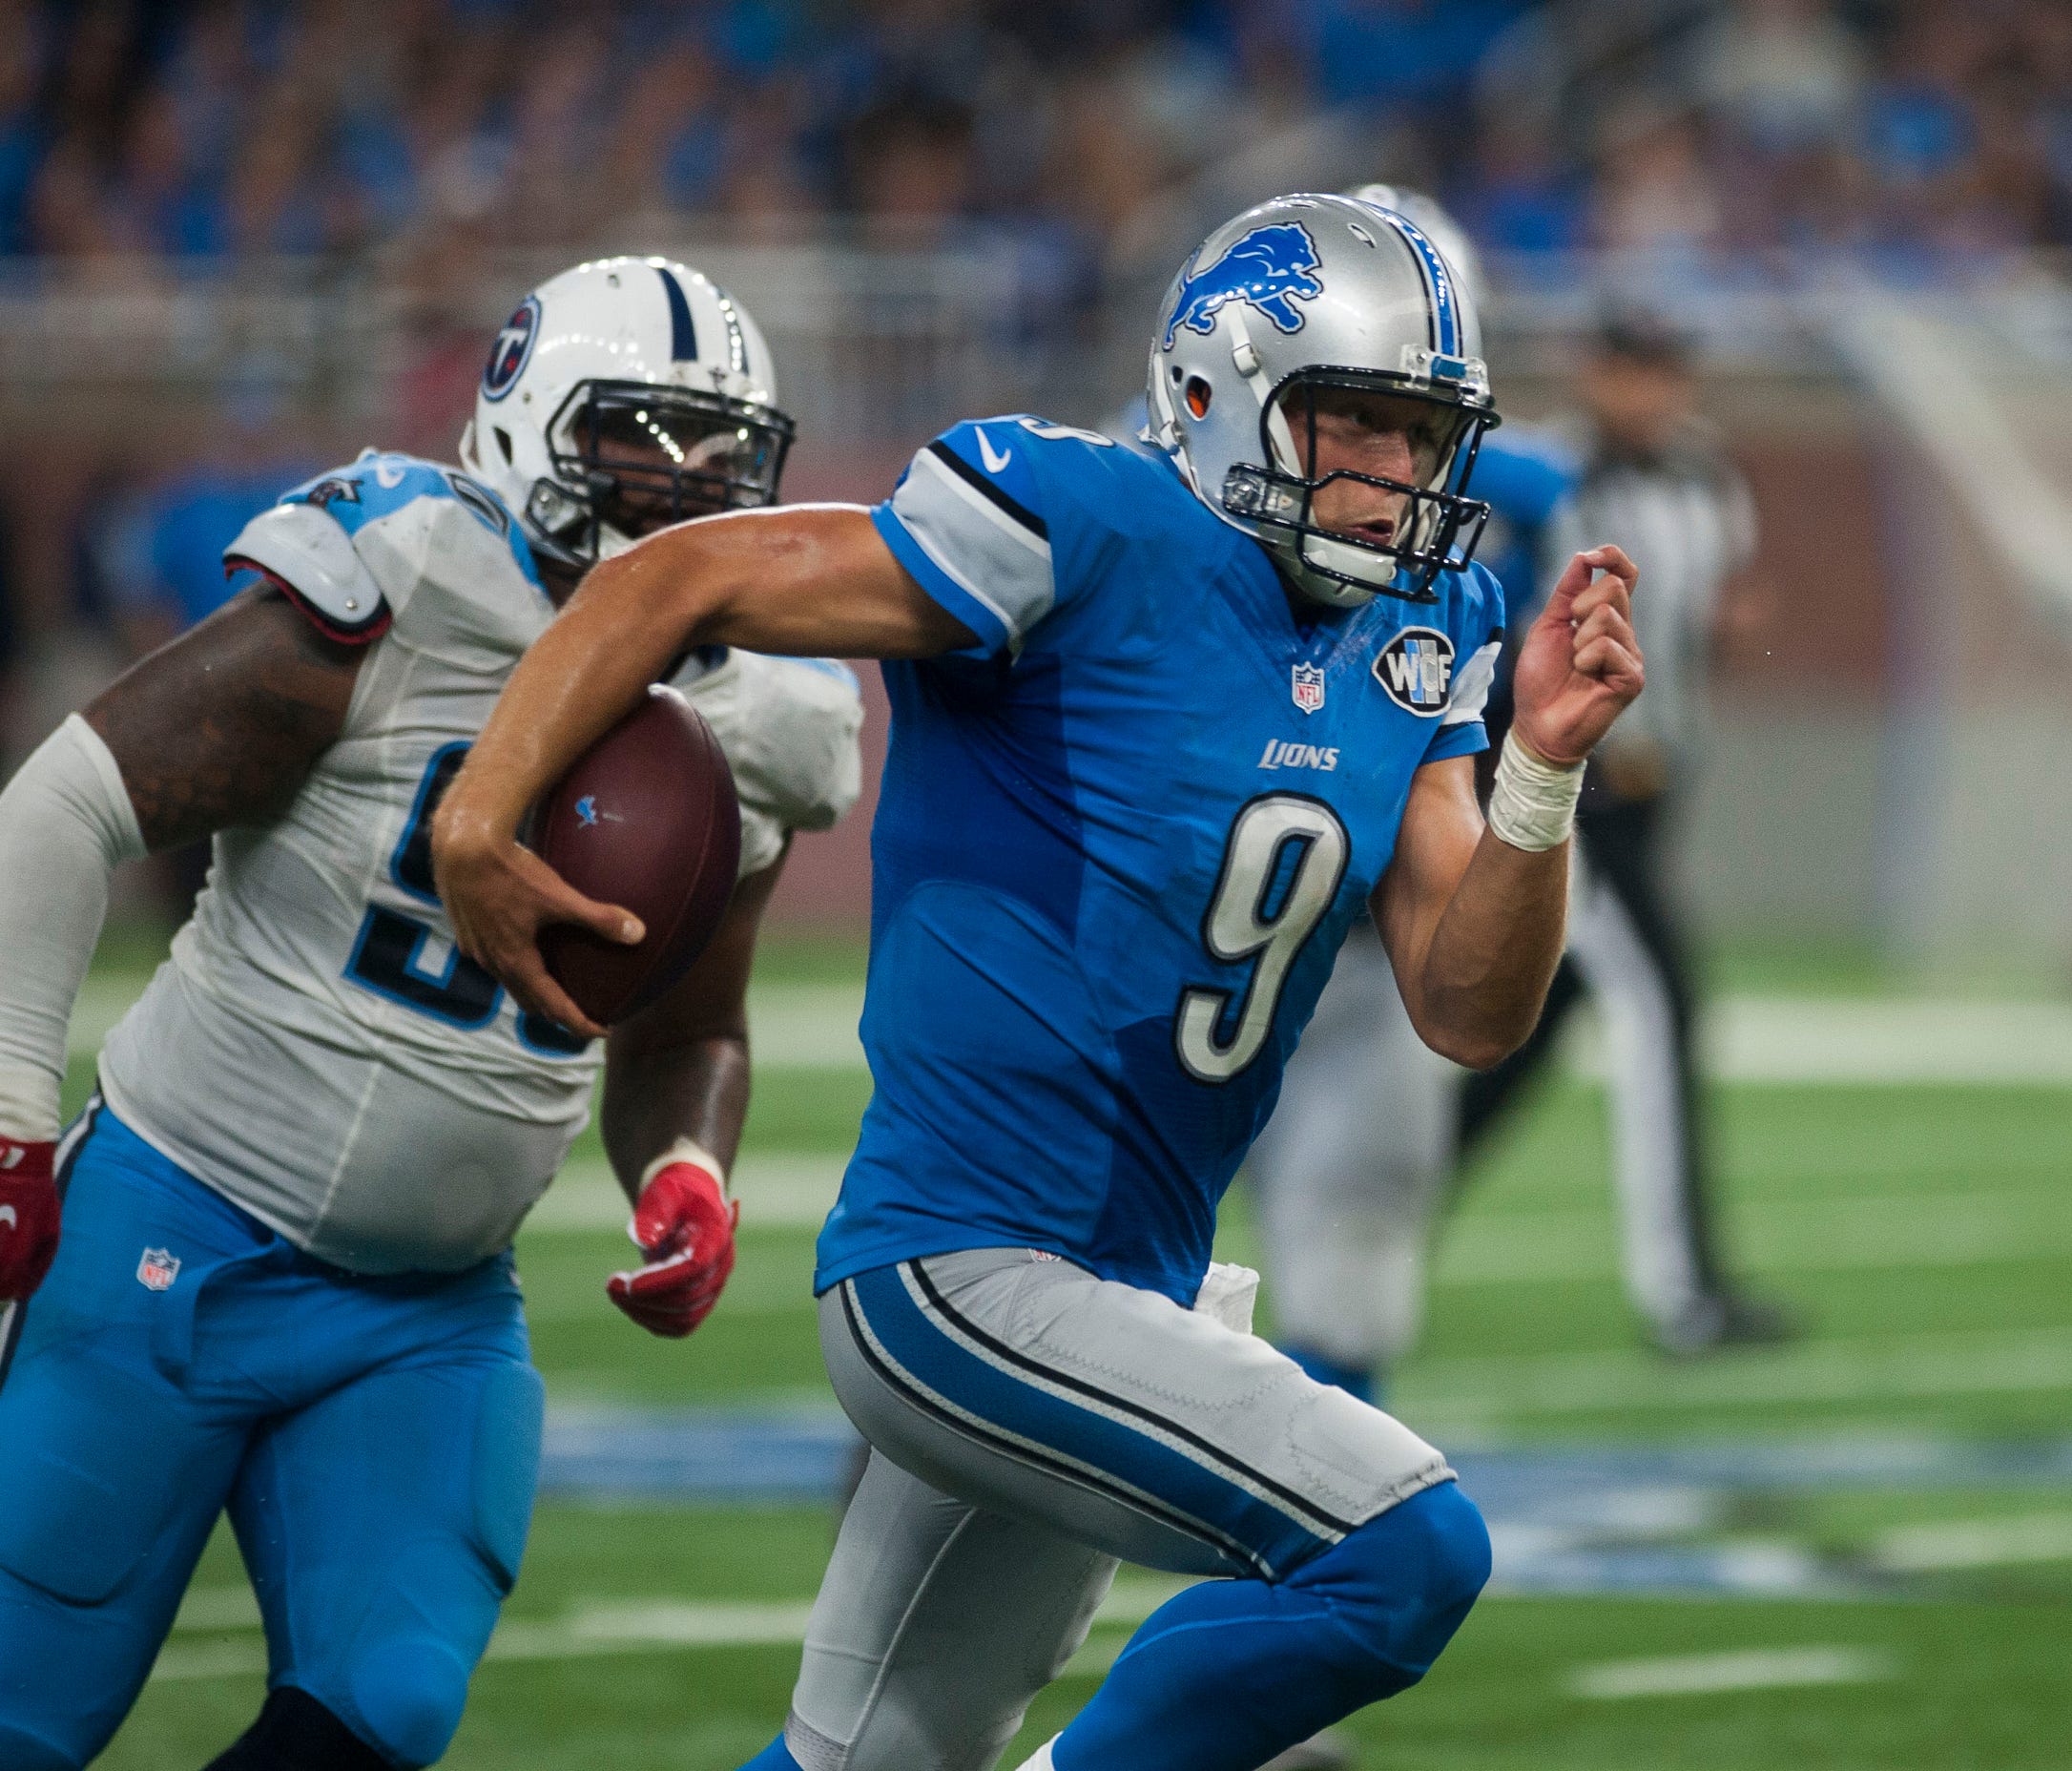 Lions quarterback Matthew Stafford rushes against the Titans at Ford Field on Sept. 18, 2016.